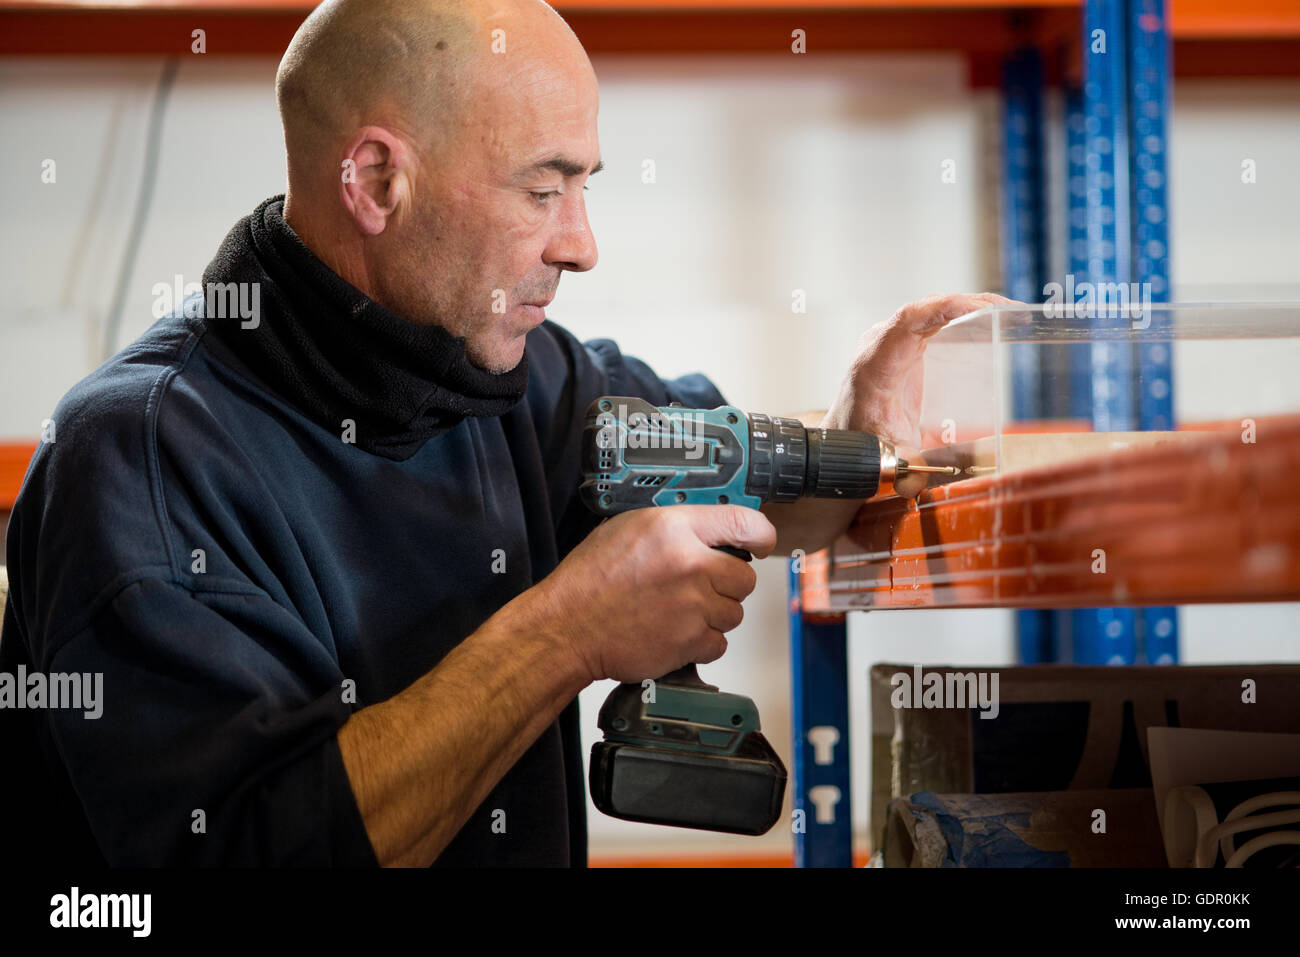 A man in a dark jacket drilling holes on one side of a transparent acrylic case using a cordless drill. Stock Photo